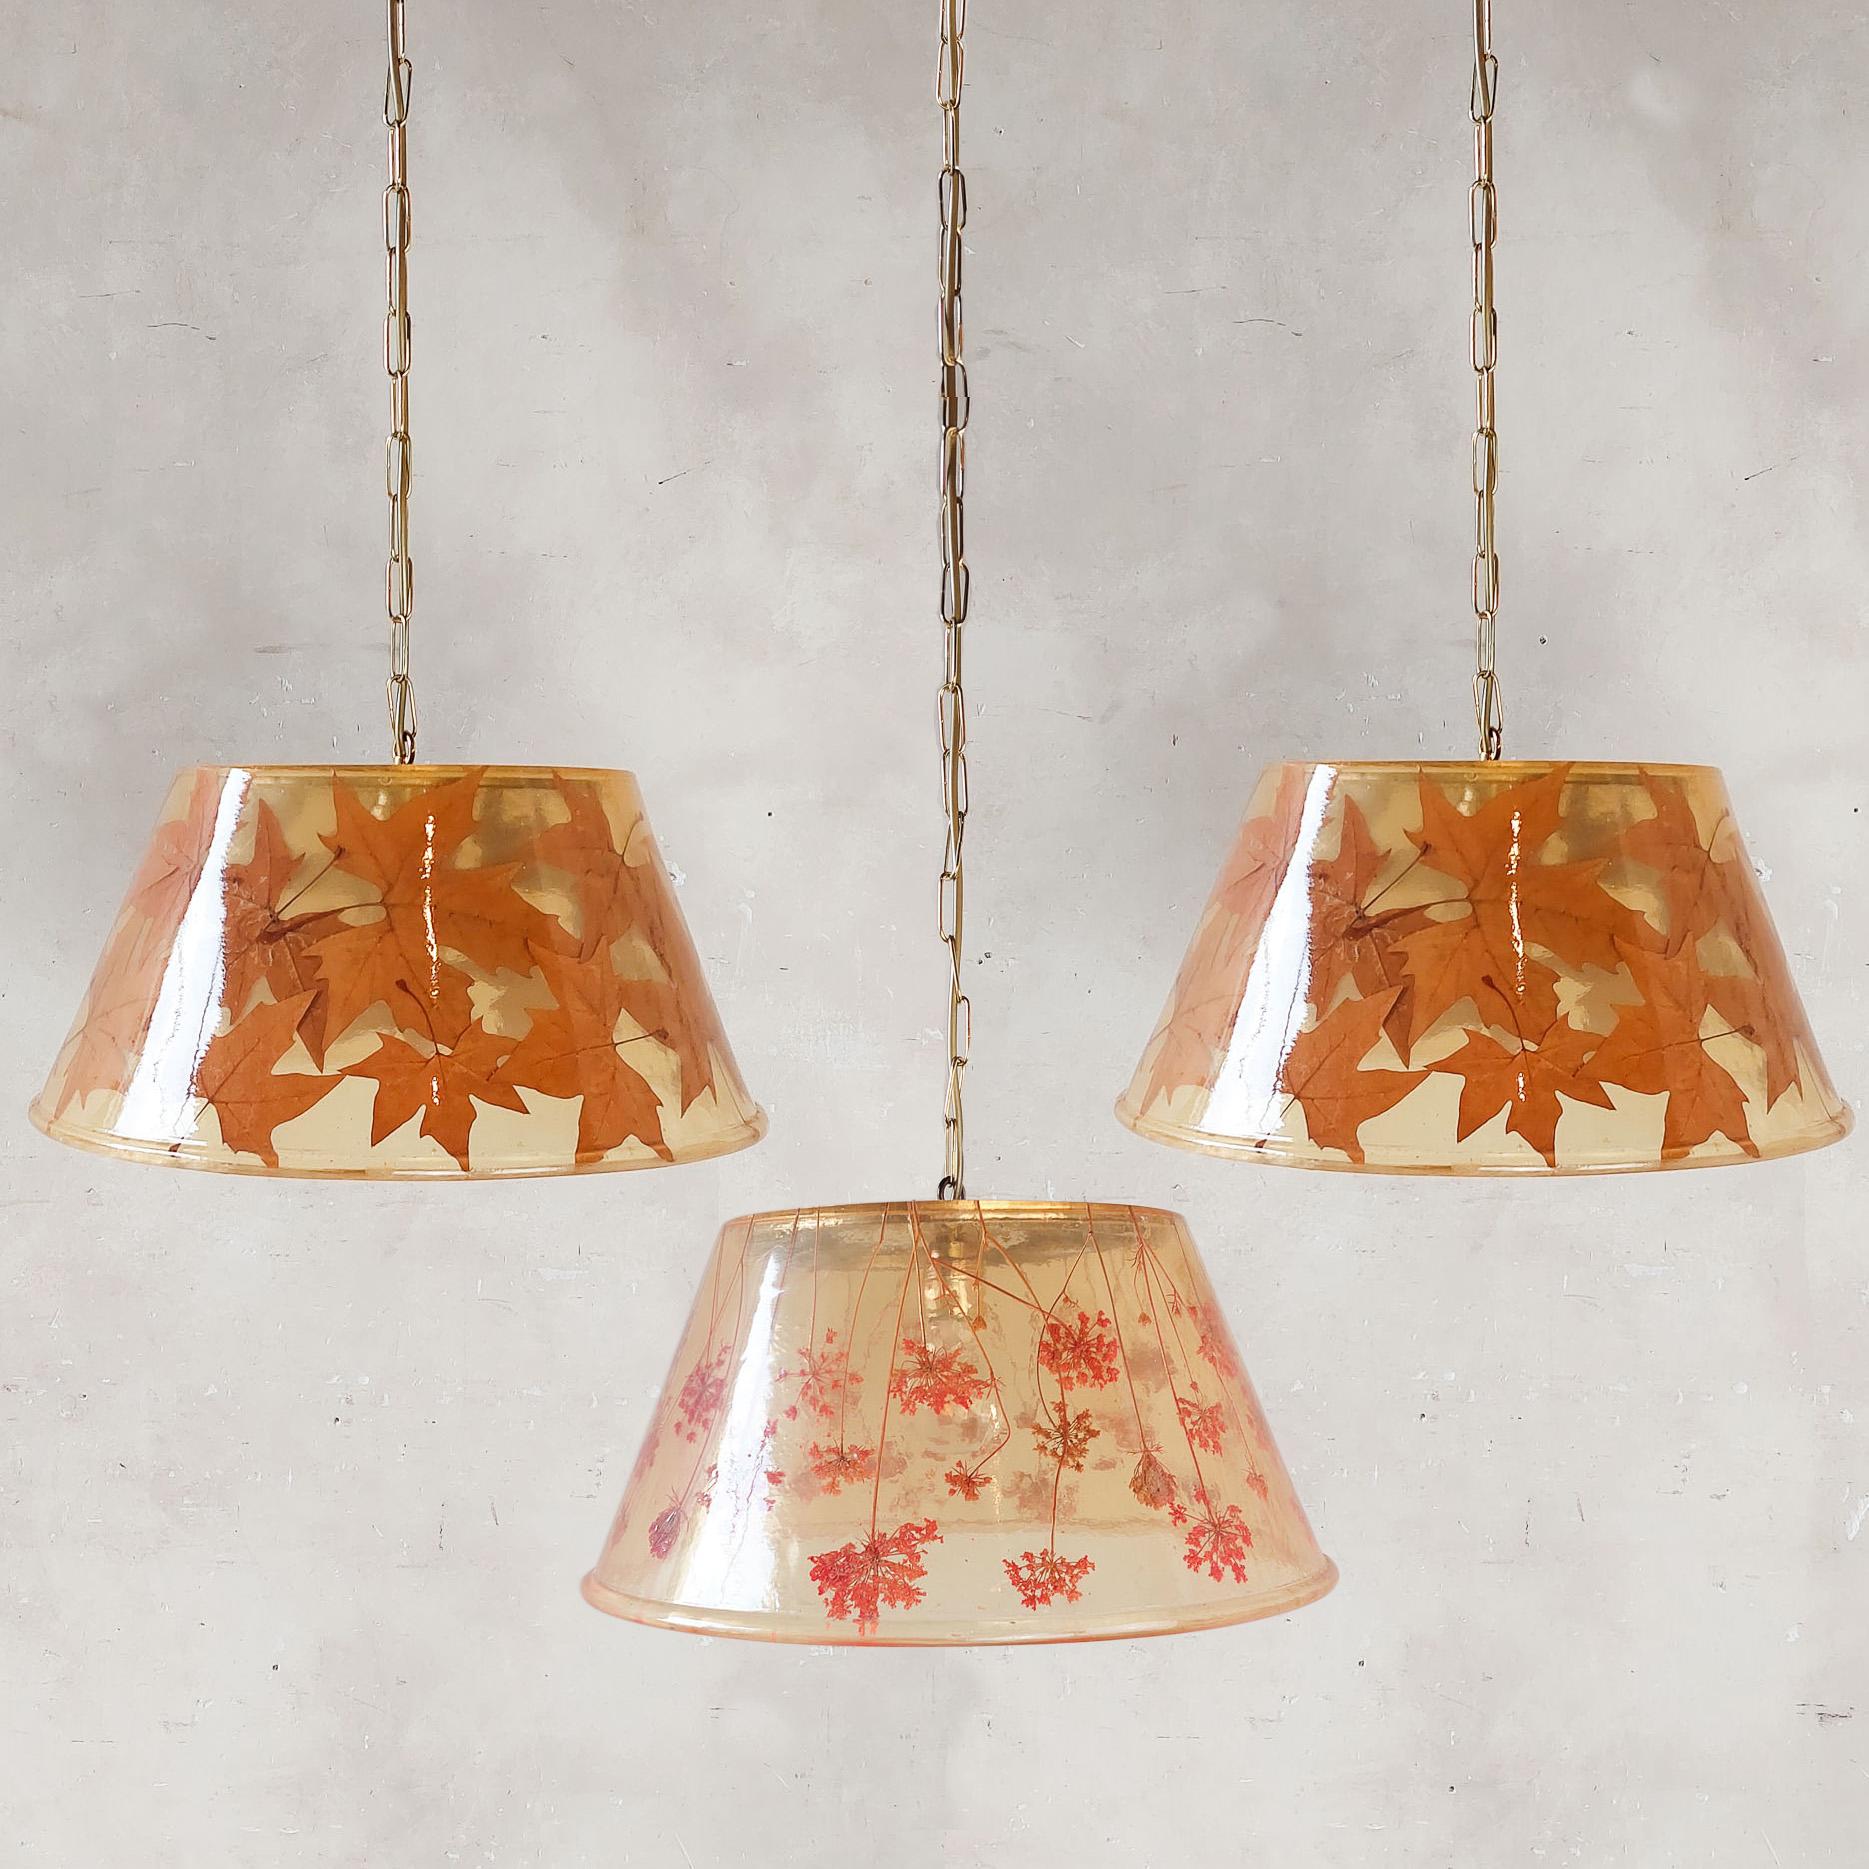 Set of 3 Italian 70s hanging lamps in the style of Gabriella Crespi. The shades are made of synthetic resin with leaves incorporated into two of them and dried flowers in the third.

Dimensions: Ø 42 cm x height 20 cm plus 95 cm cord